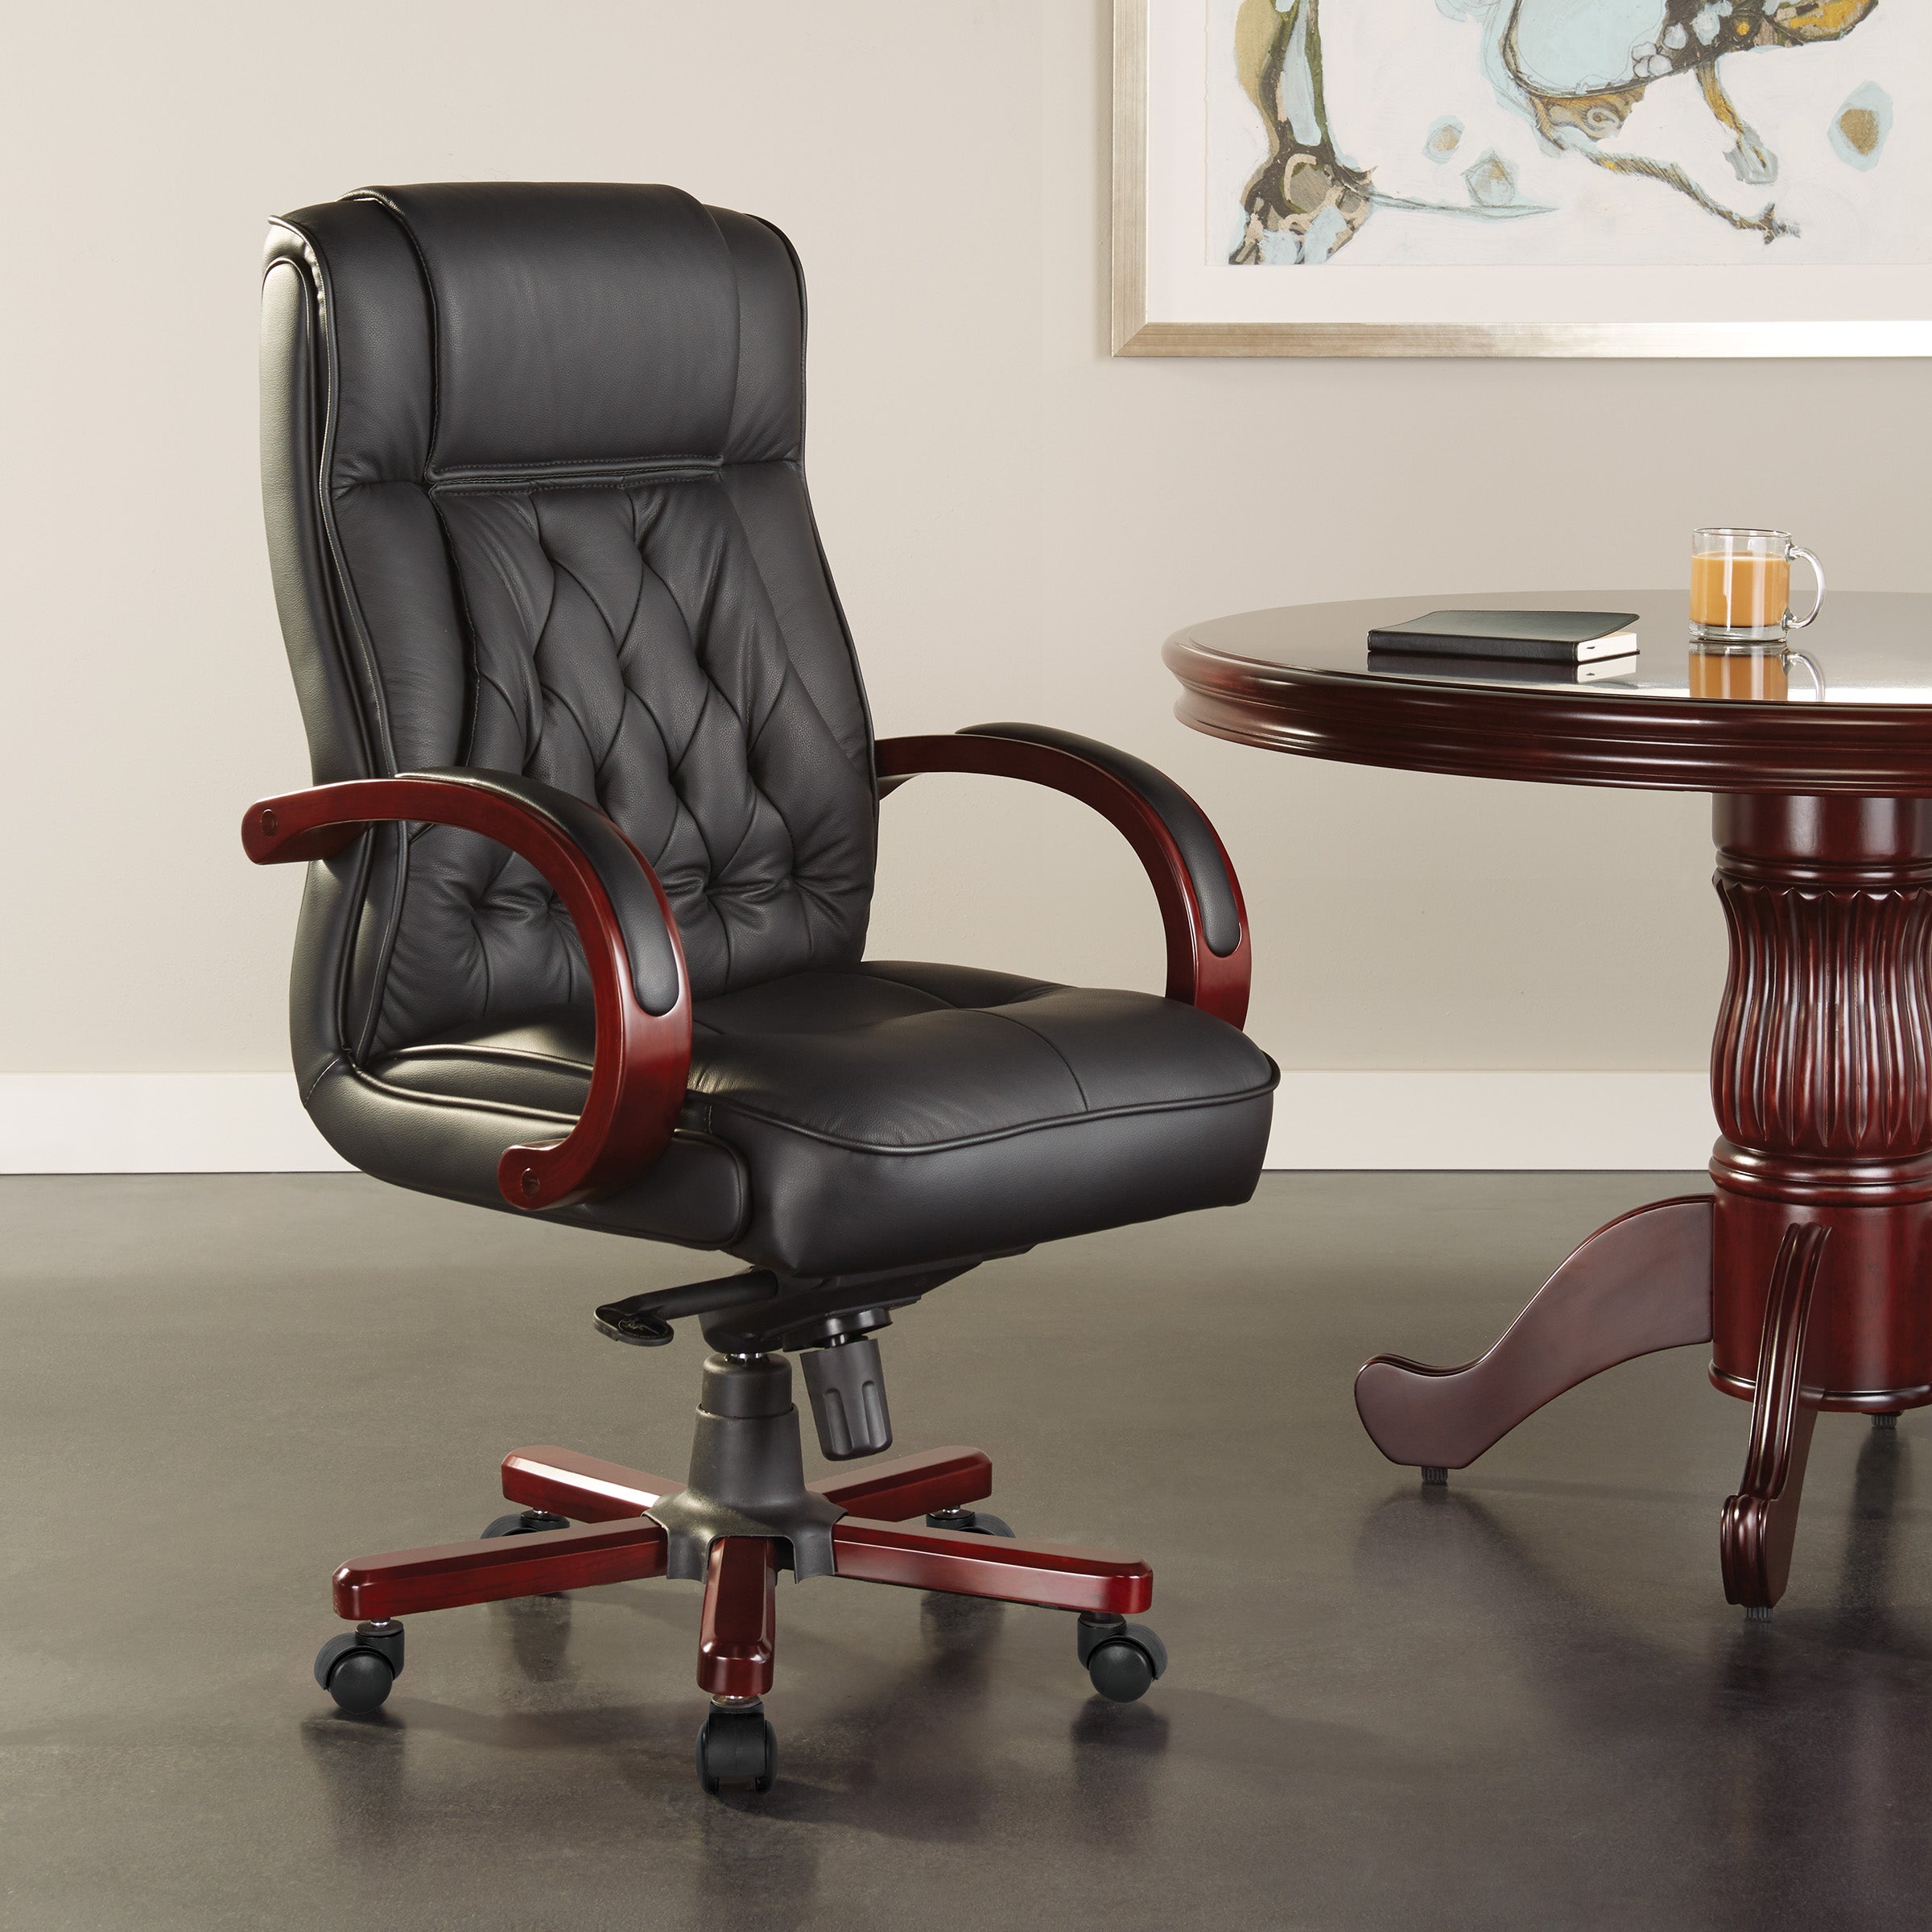 TWN300L - Tradittional High Back Executive Leather Office Chair by Office Star